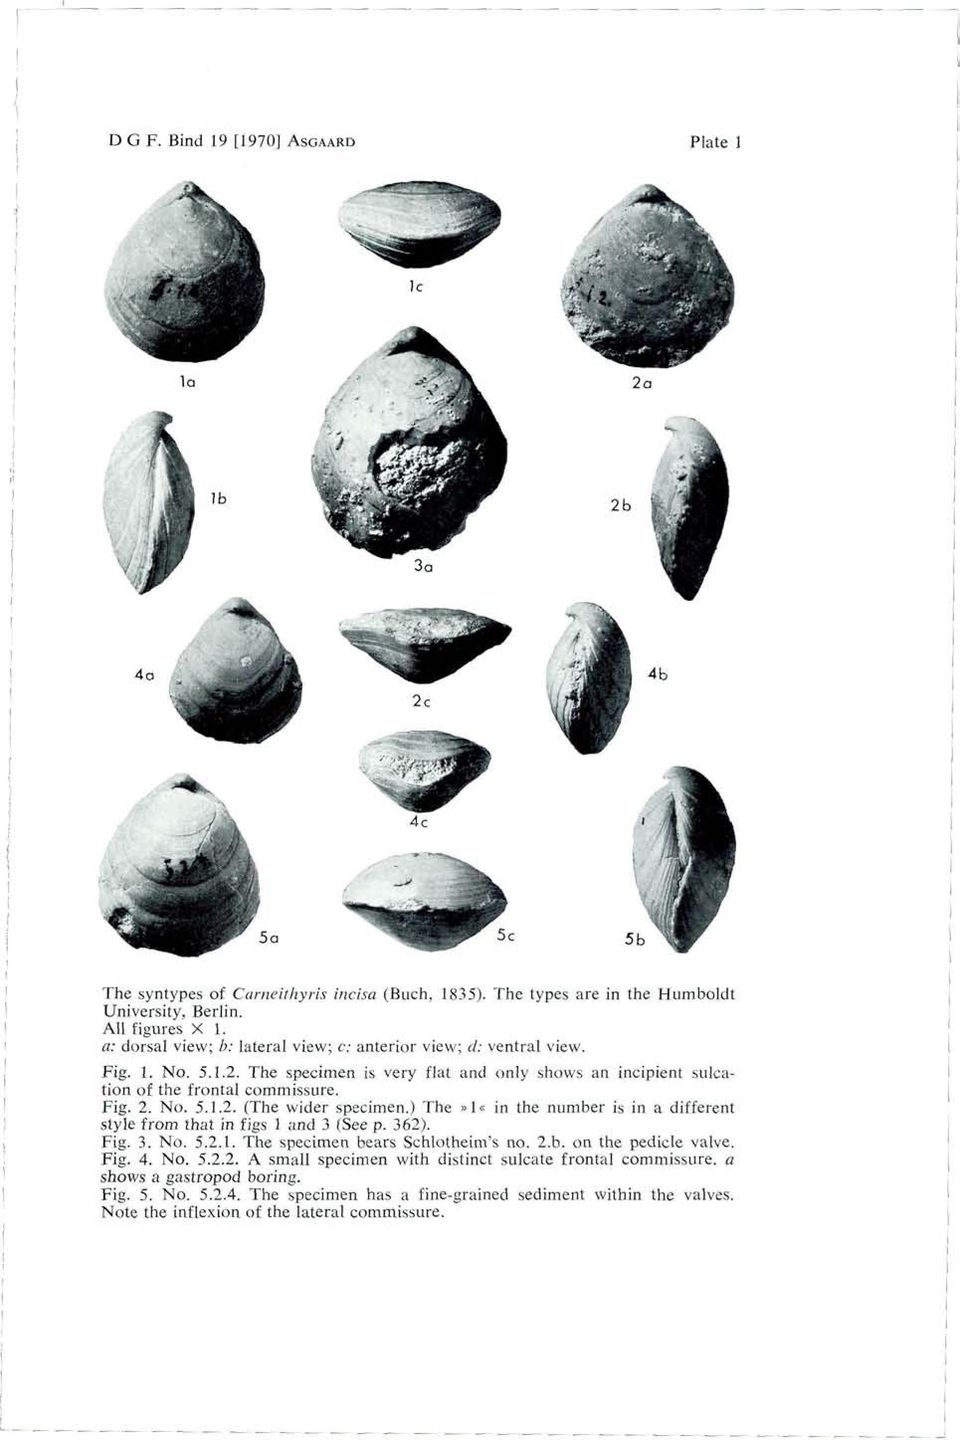 ) The»1«in the number is in a different style from that in figs 1 and 3 (See p. 362). Fig. 3. No. 5.2.1. The specimen bears Schlotheim's no. 2.b. on the pedicle valve. Fig, 4. No. 5.2.2. A small specimen with distinct sulcate frontal commissure, a shows a gastropod boring.